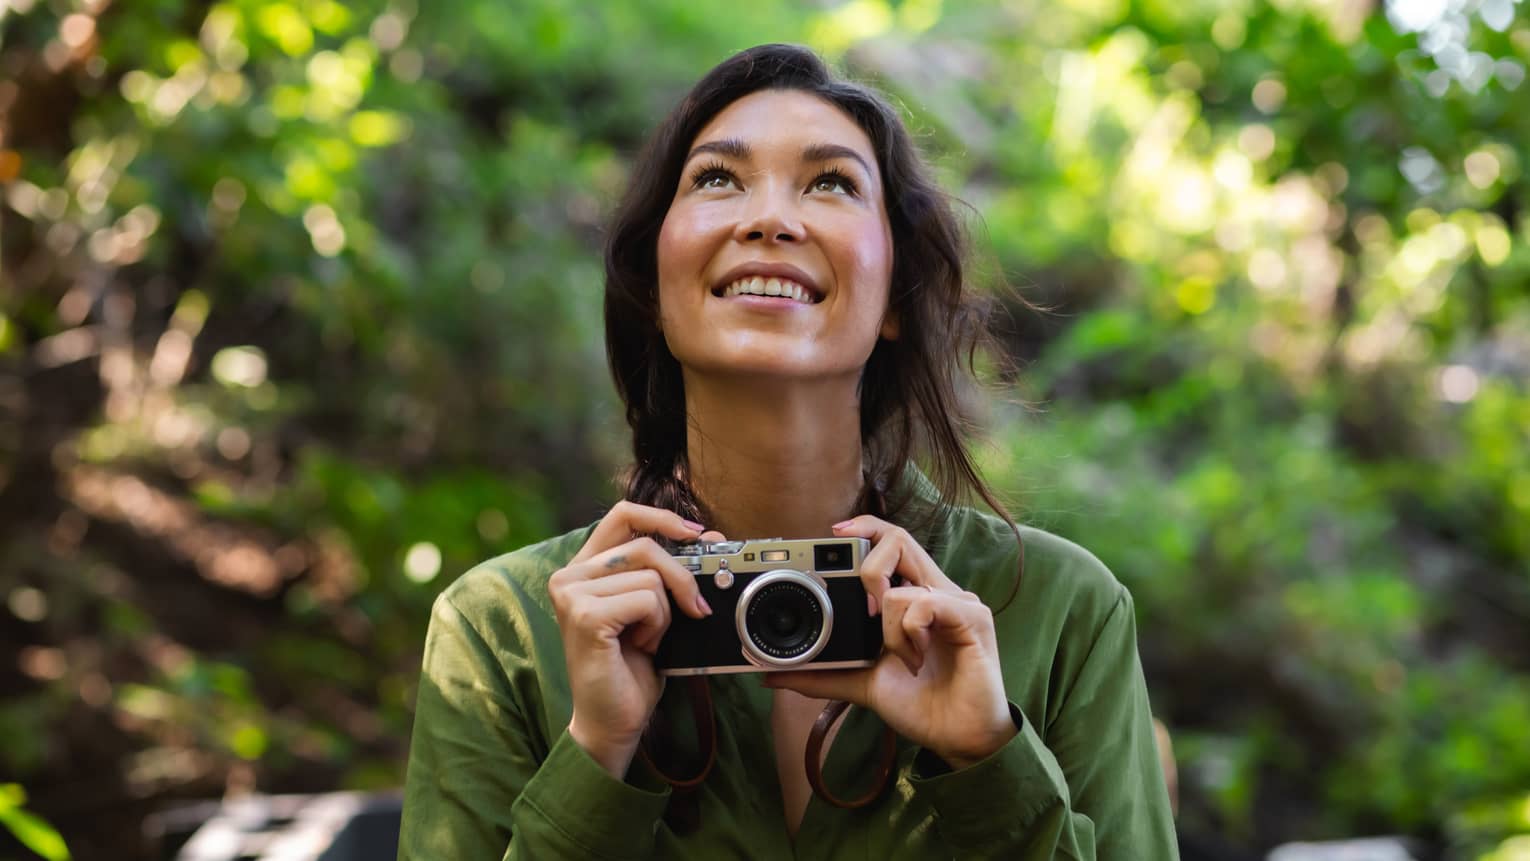 Woman with long dark hair wearing a green button-down shirt holds a camera as she looks upward in the forest